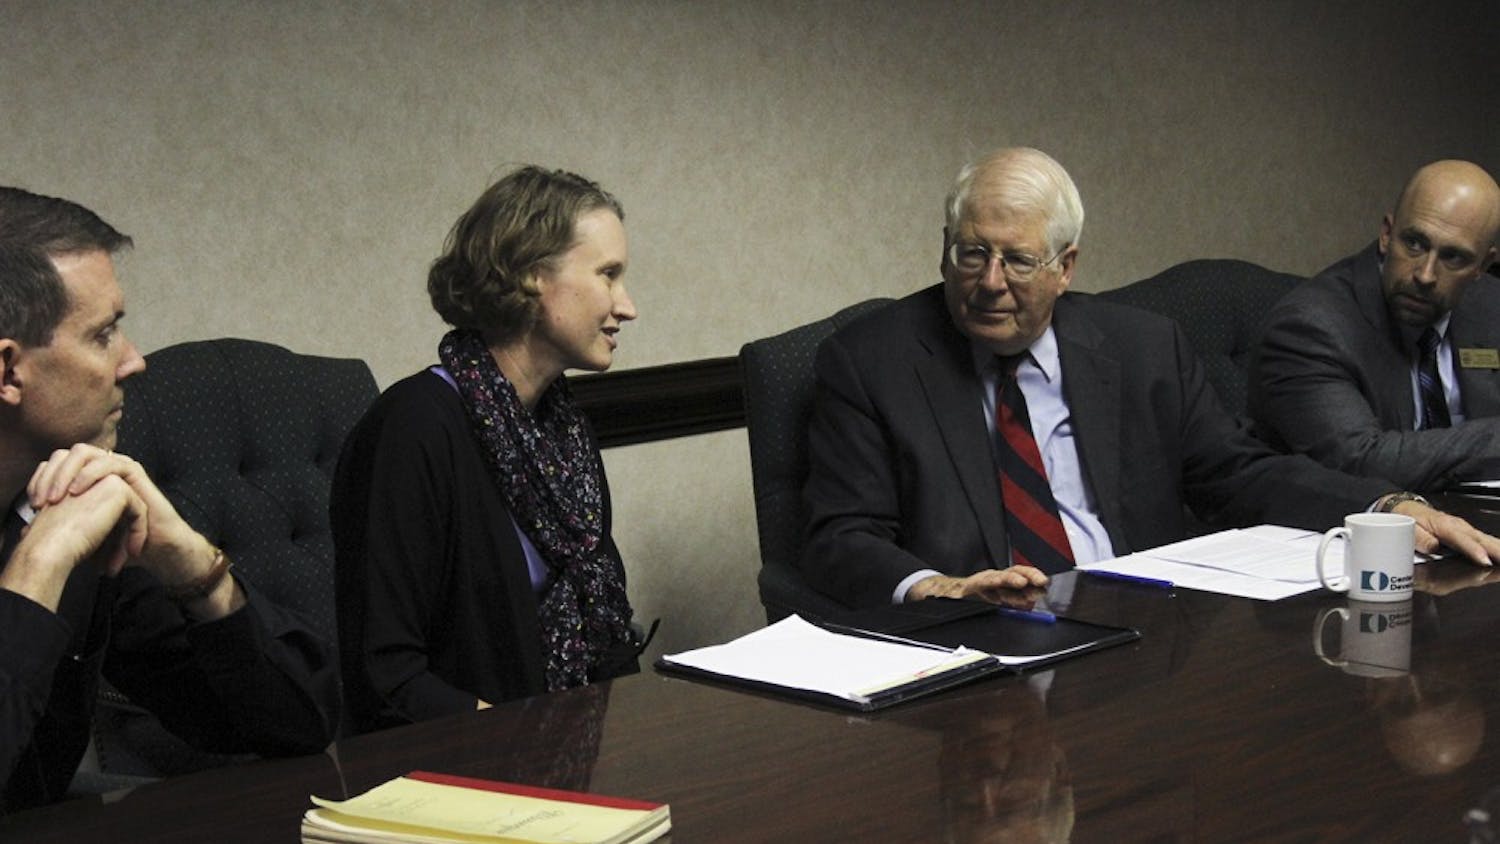 Congressman David Price-D (right) visited the Center for Developmental Science Tuesday afternoon. Andrea Hussong, the center's director, gave Price a tour and hosted a meeting to discuss federal funding for research programs.